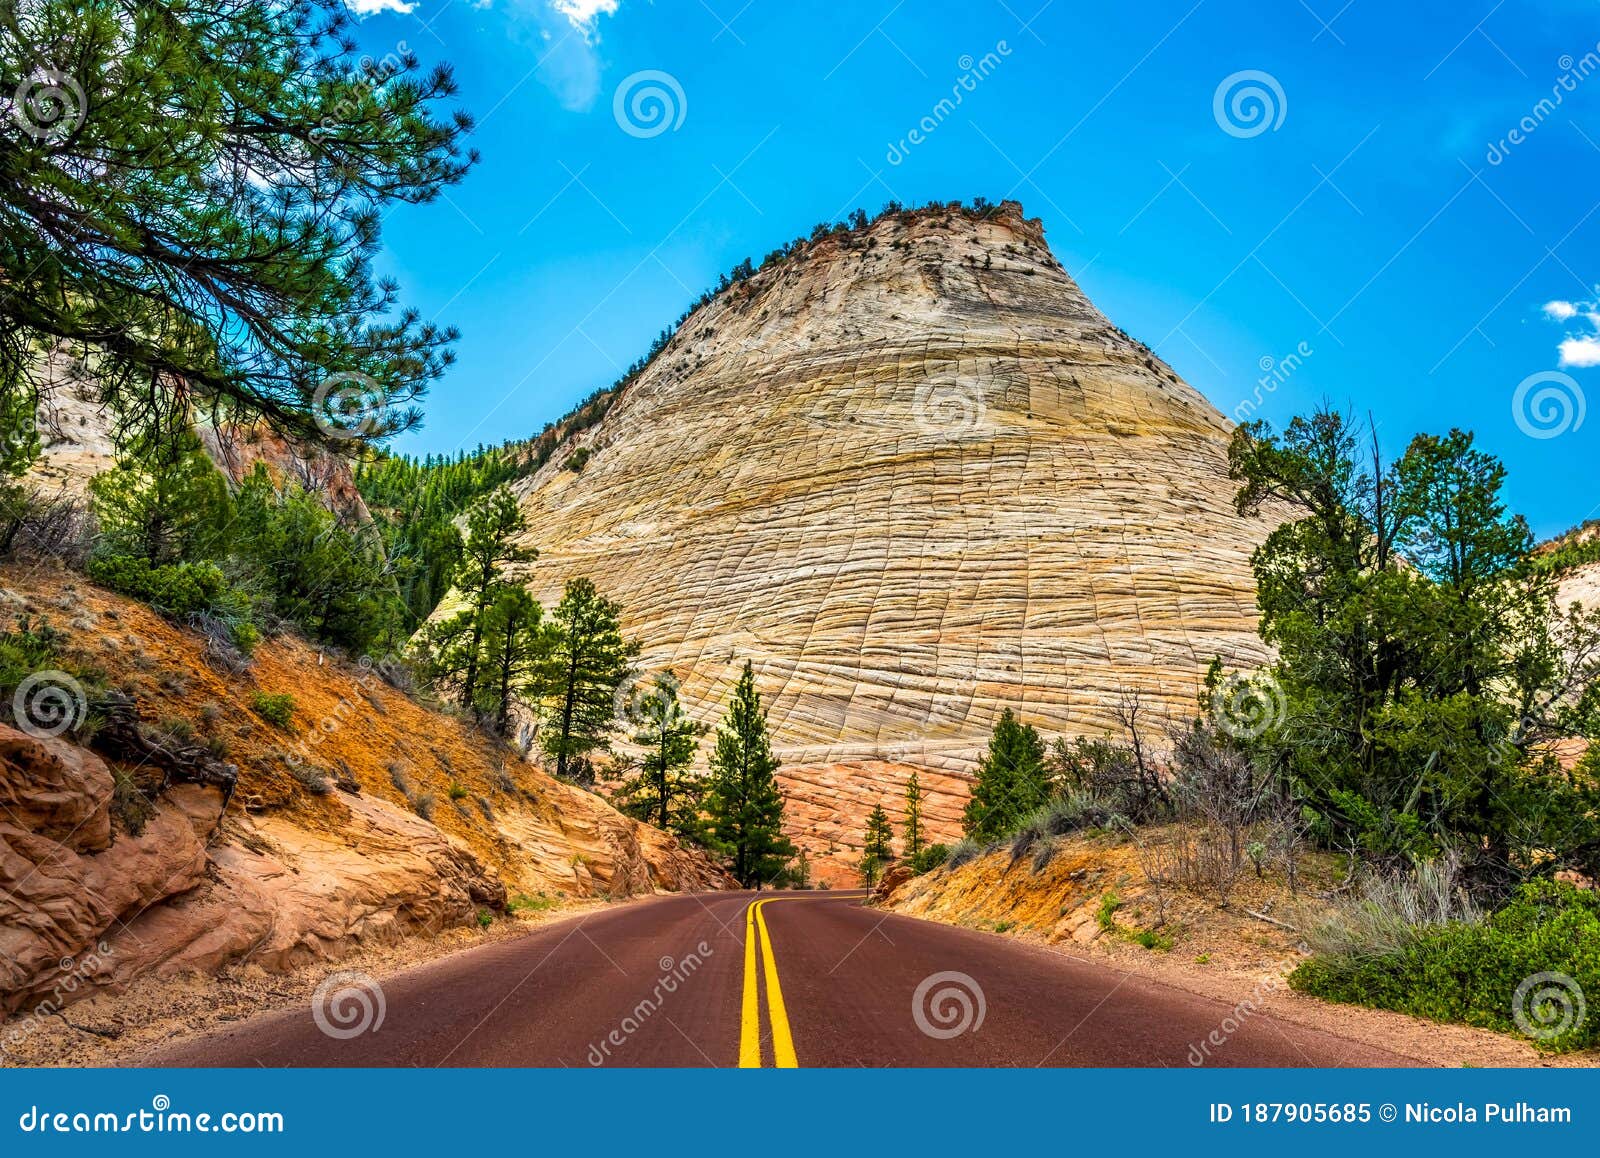 a checkerboard mesas dominates the road to zion national park, utah